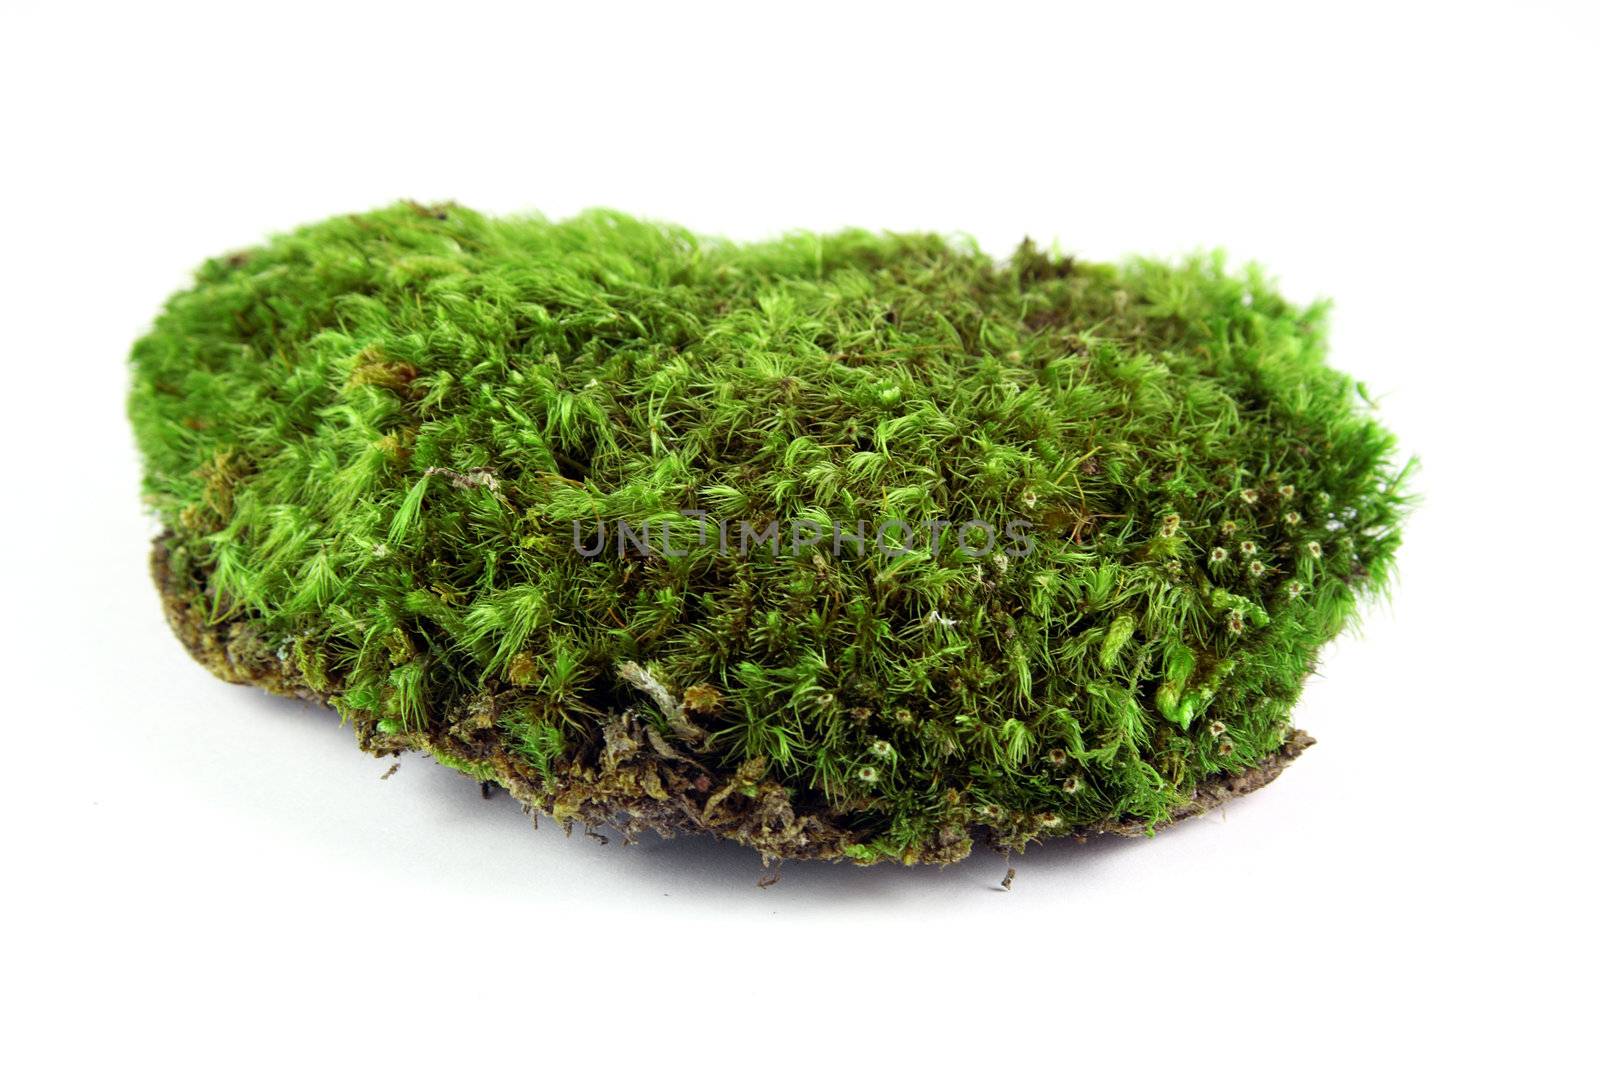 A clump of green moss shot on a solid white background.